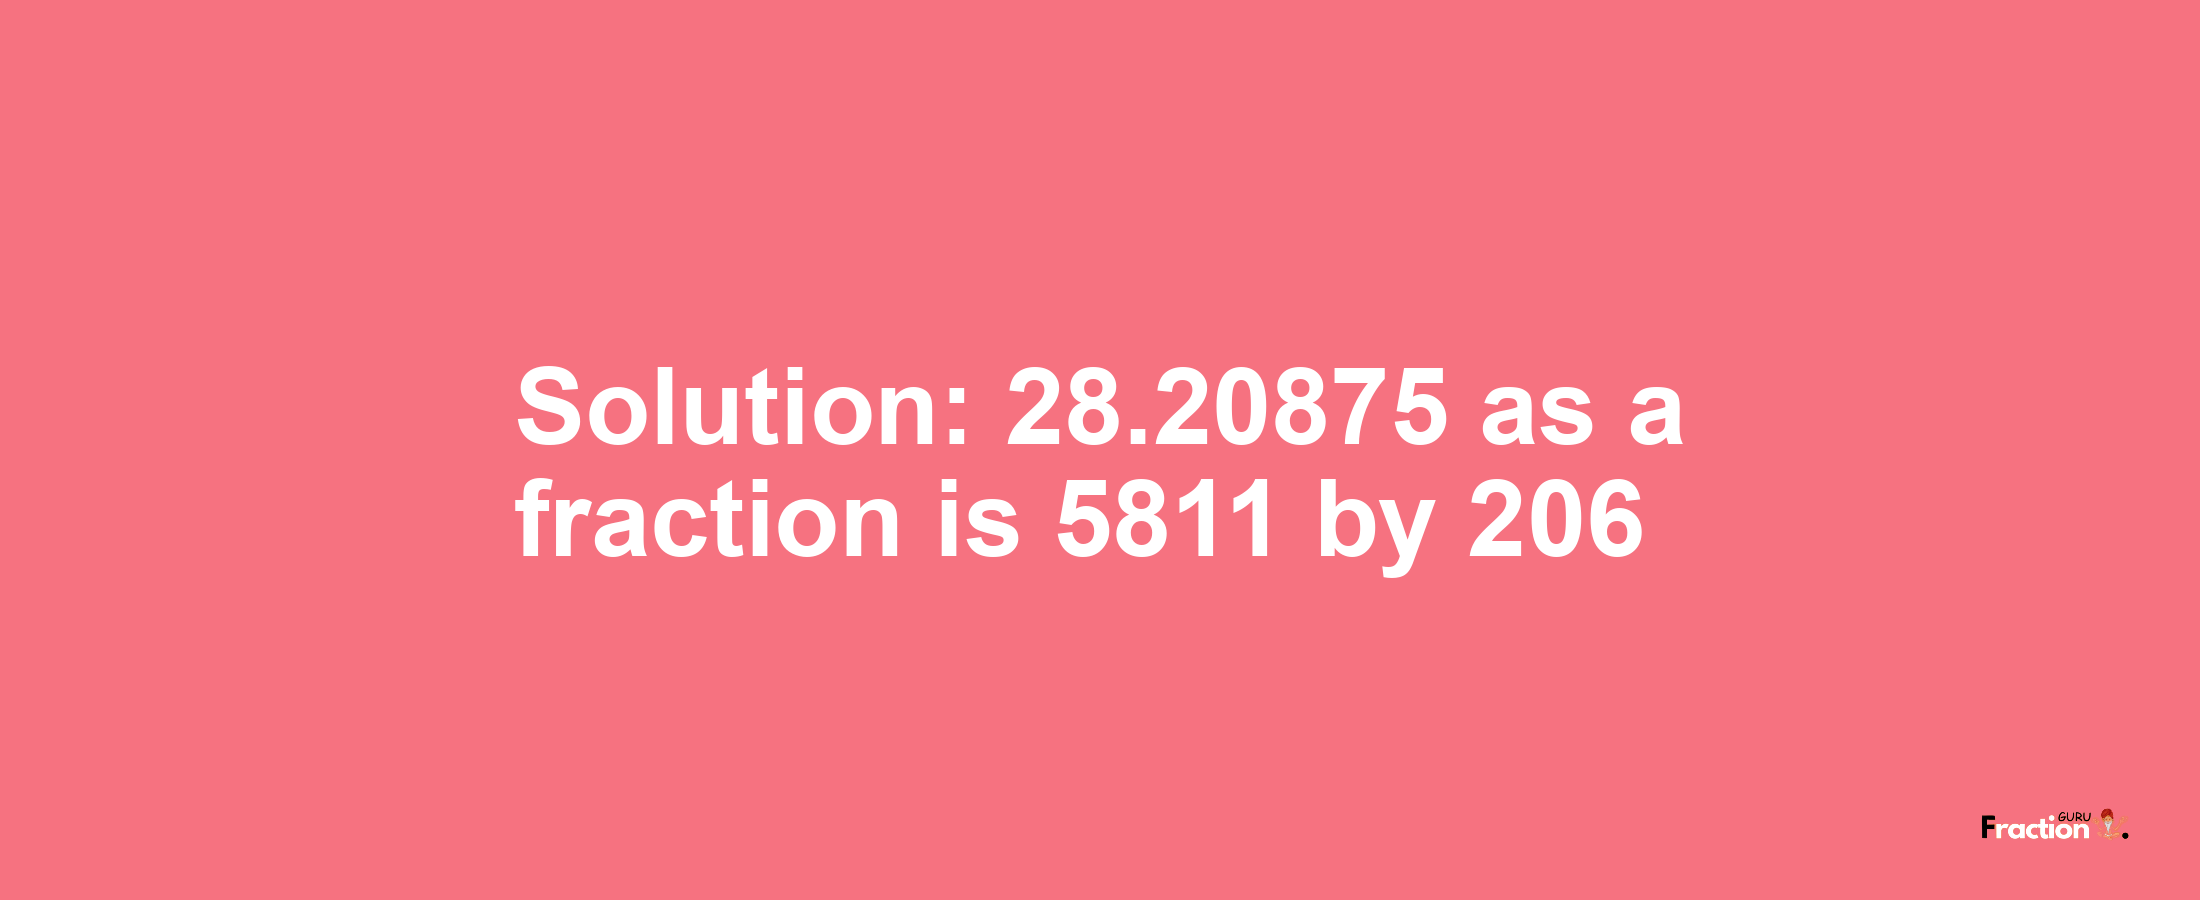 Solution:28.20875 as a fraction is 5811/206